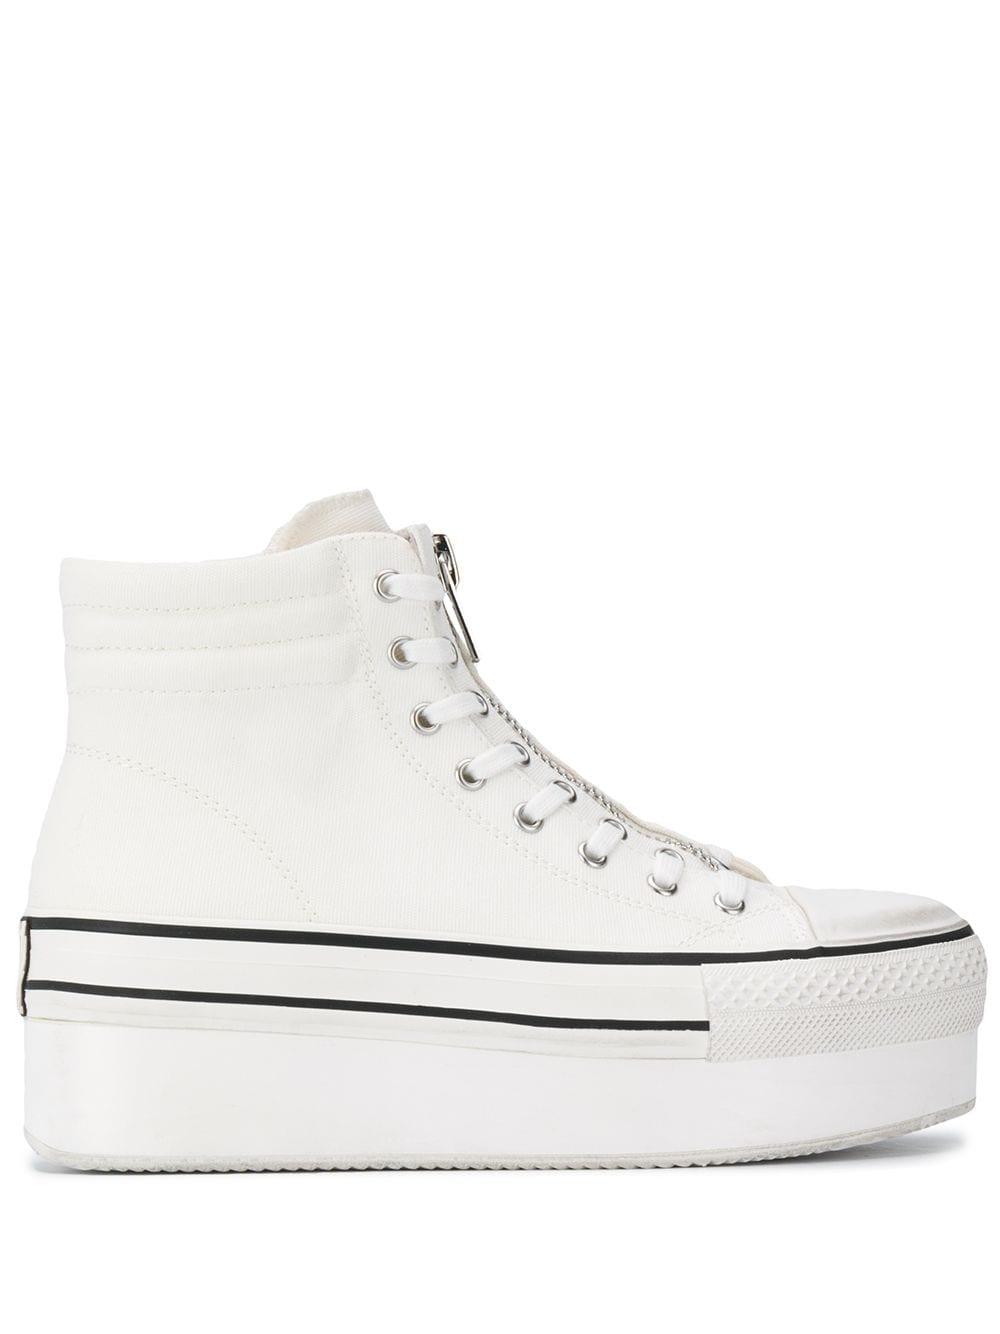 Ash Jagger Platform Sneakers in White - Lyst